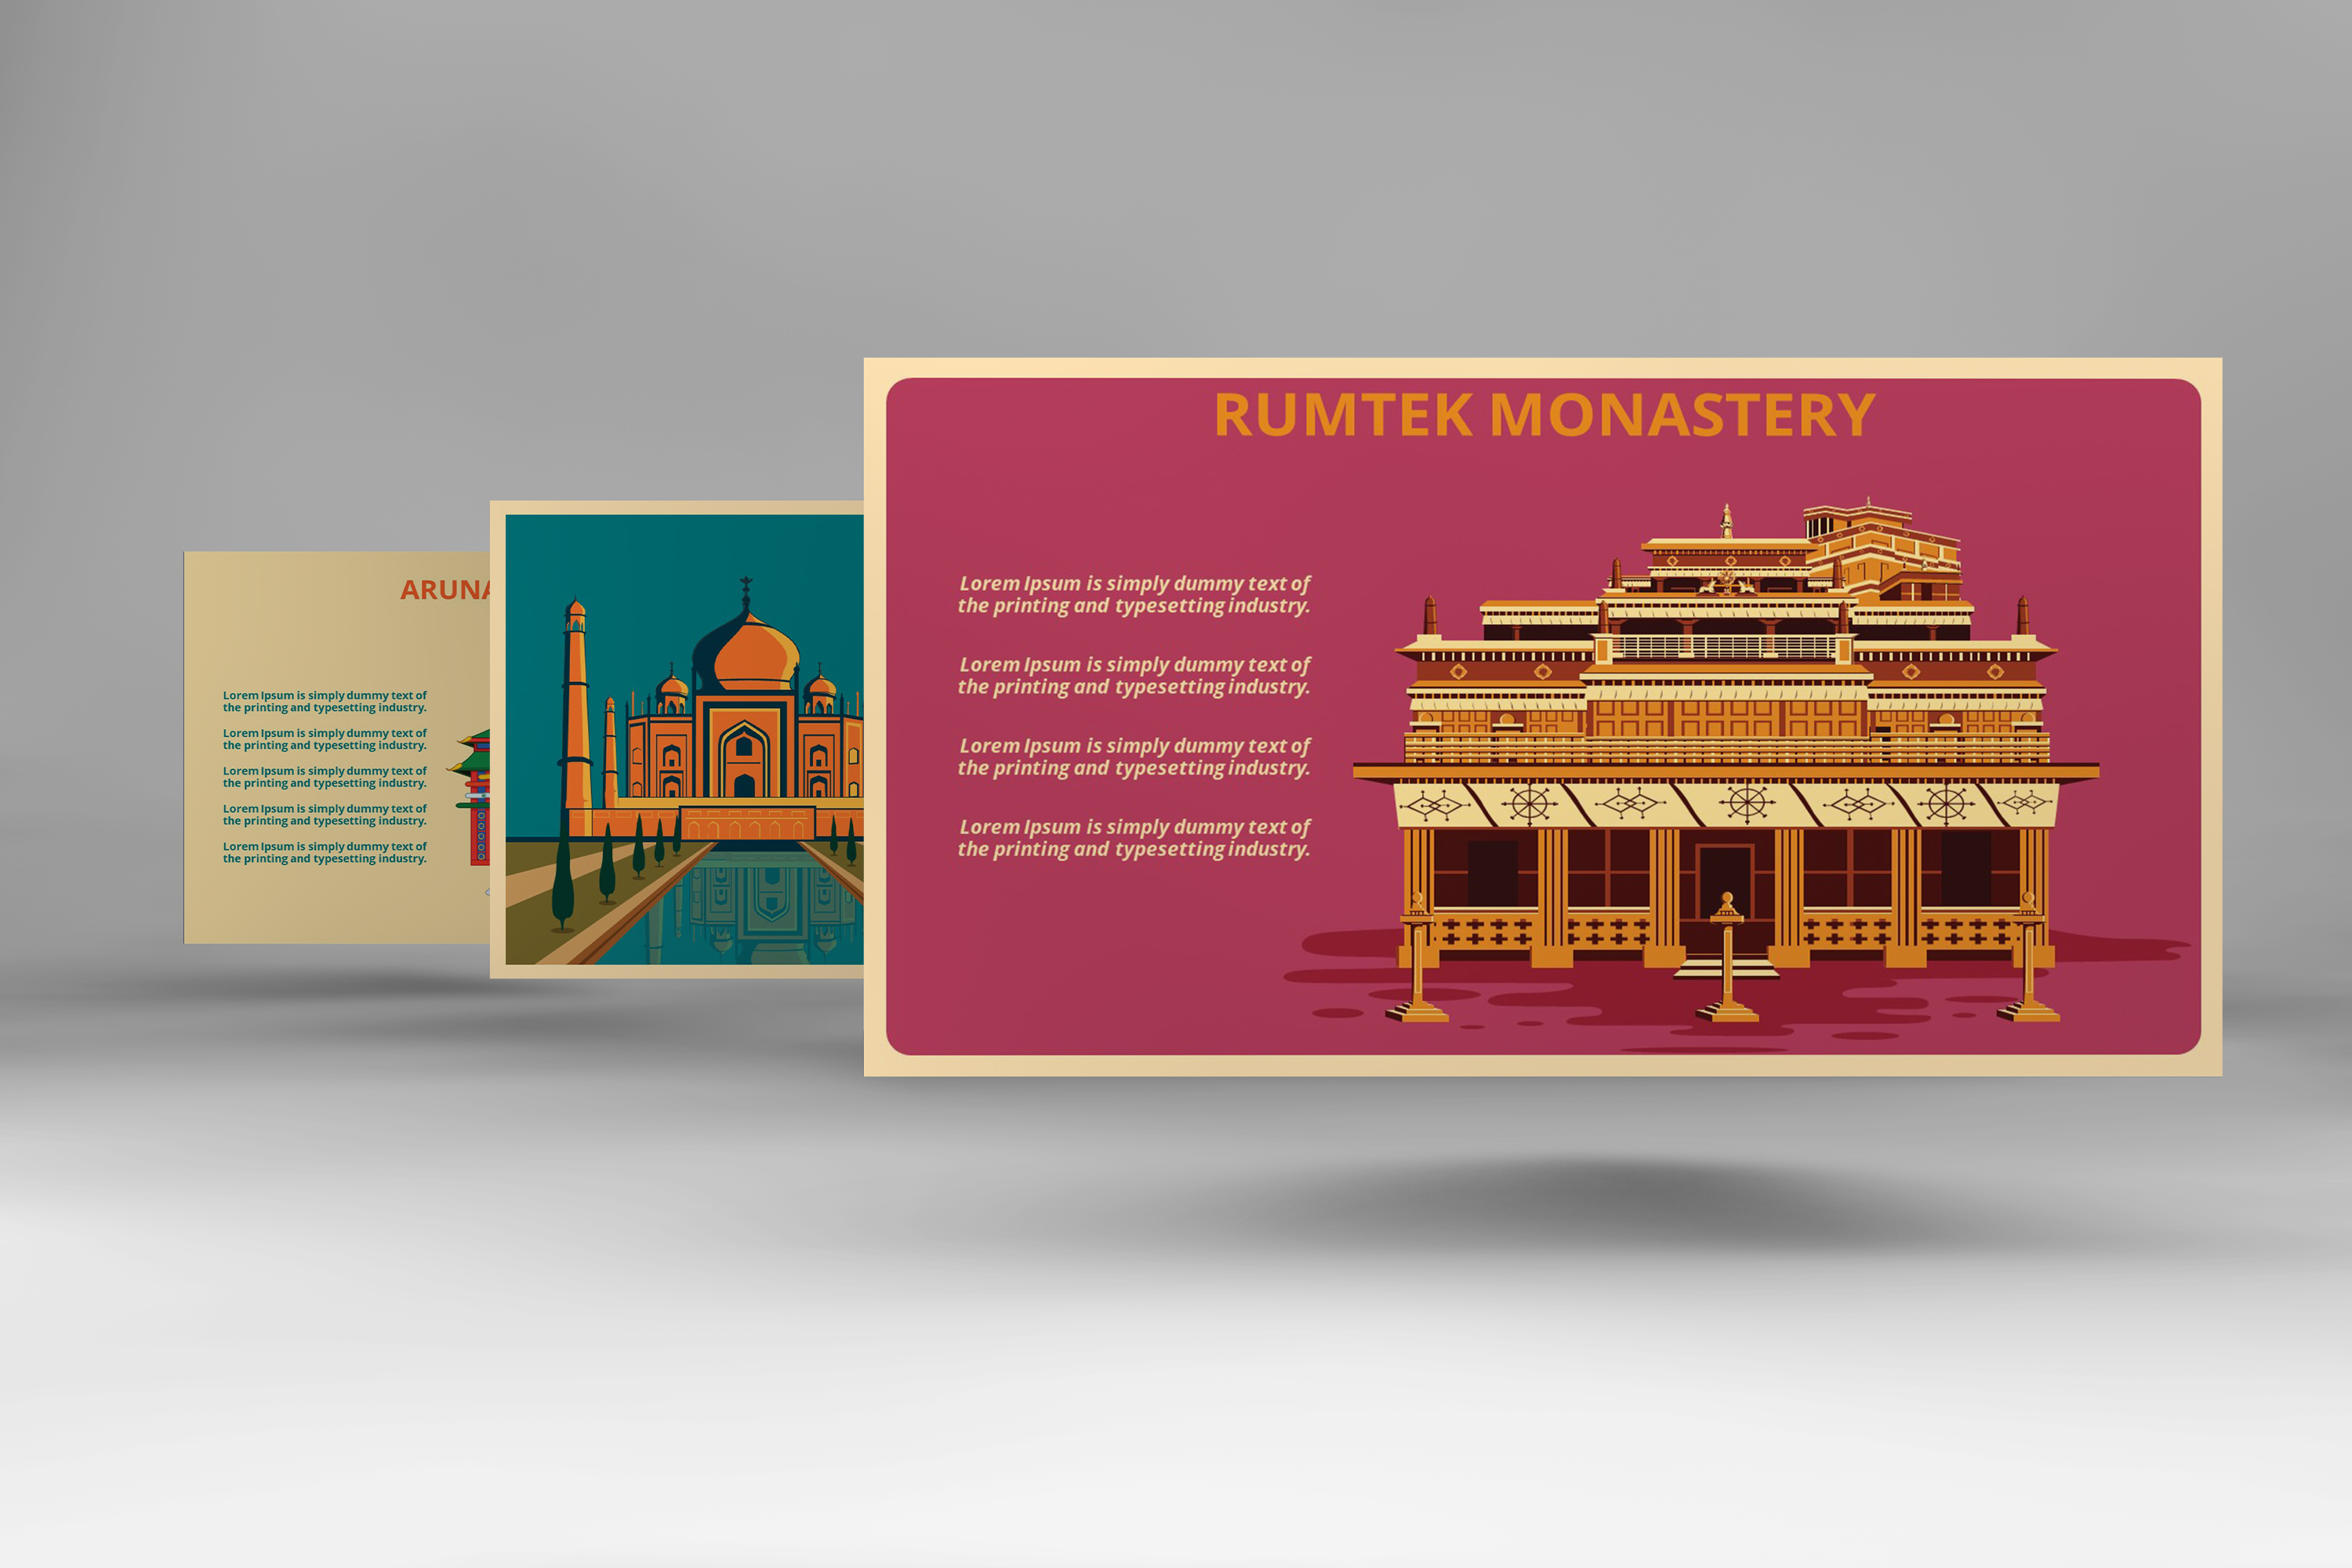 powerpoint presentation on indian culture